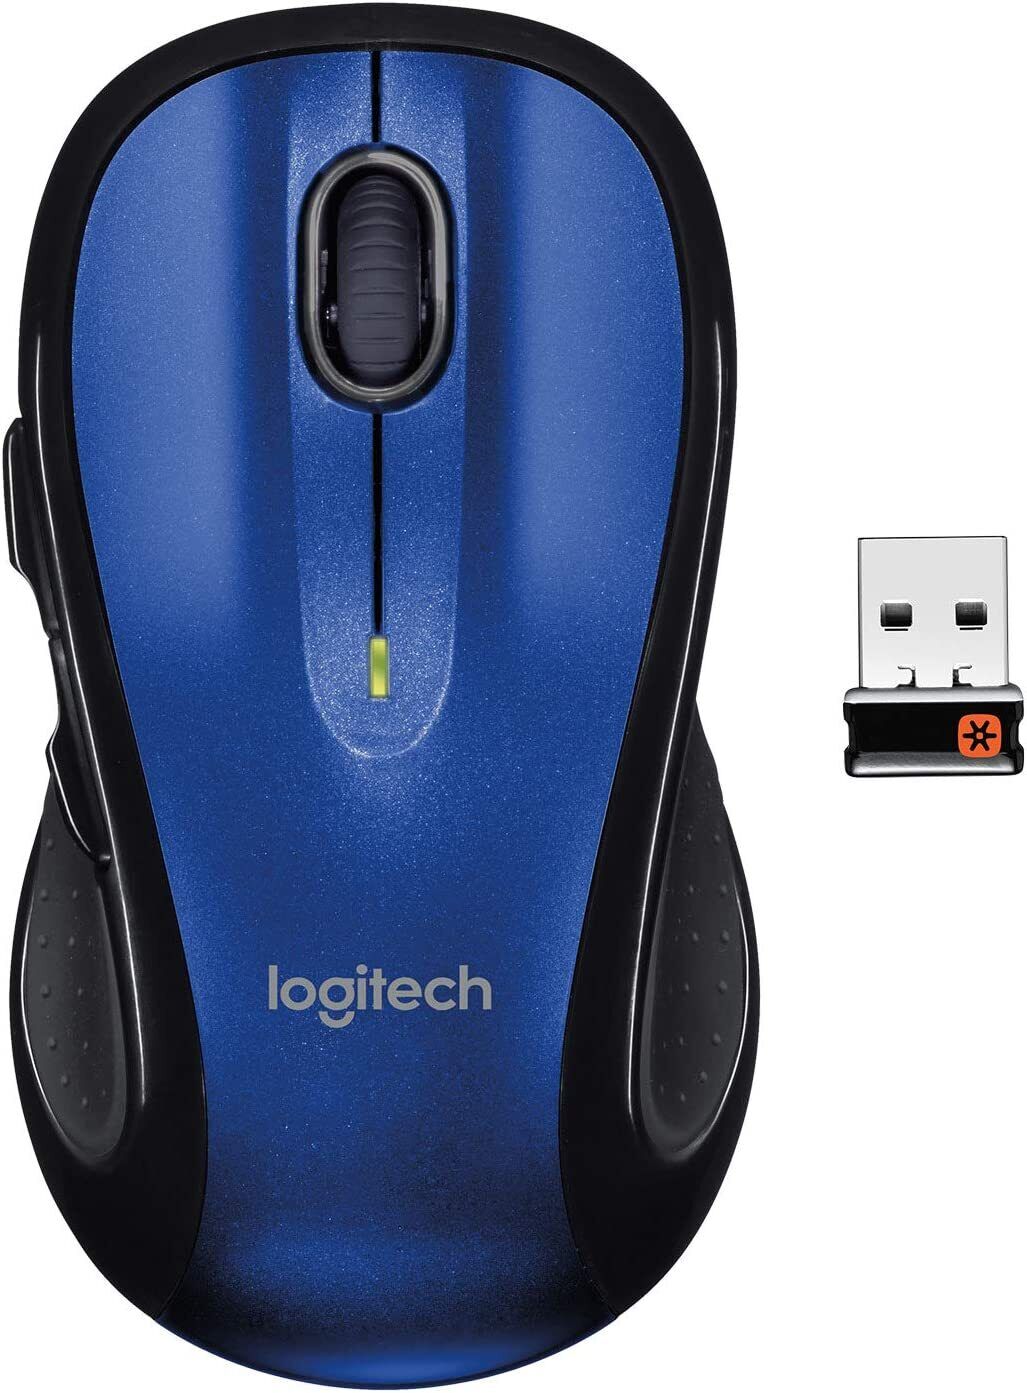  Logitech M510 Wireless  Mouse Comfortable Shape with USB Unifying Receiver NEW